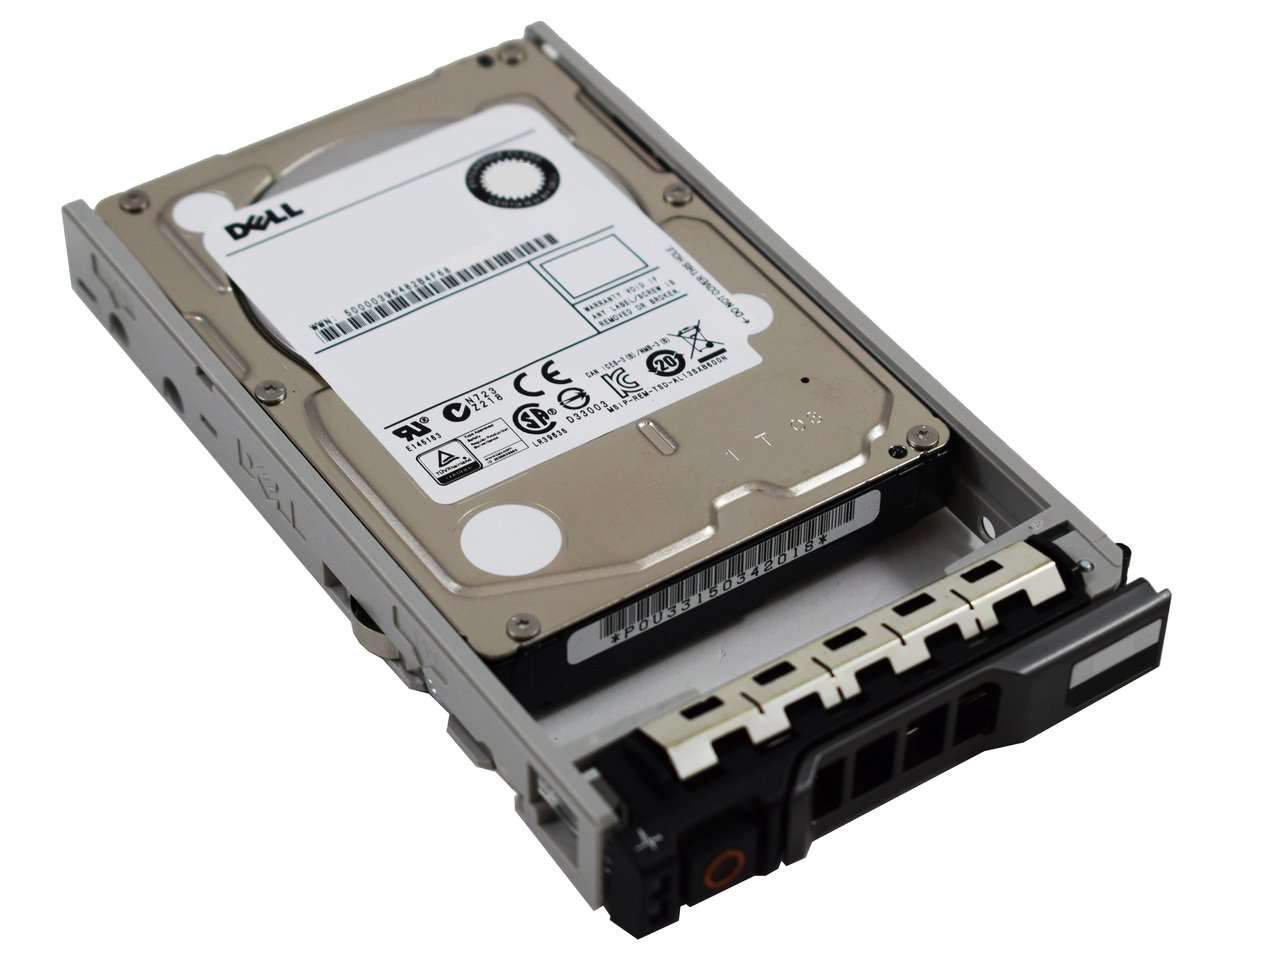 Dell G13 06WC9D 300GB 15K RPM SAS 6Gb/s 512n 2.5" Manufacturer Recertified HDD